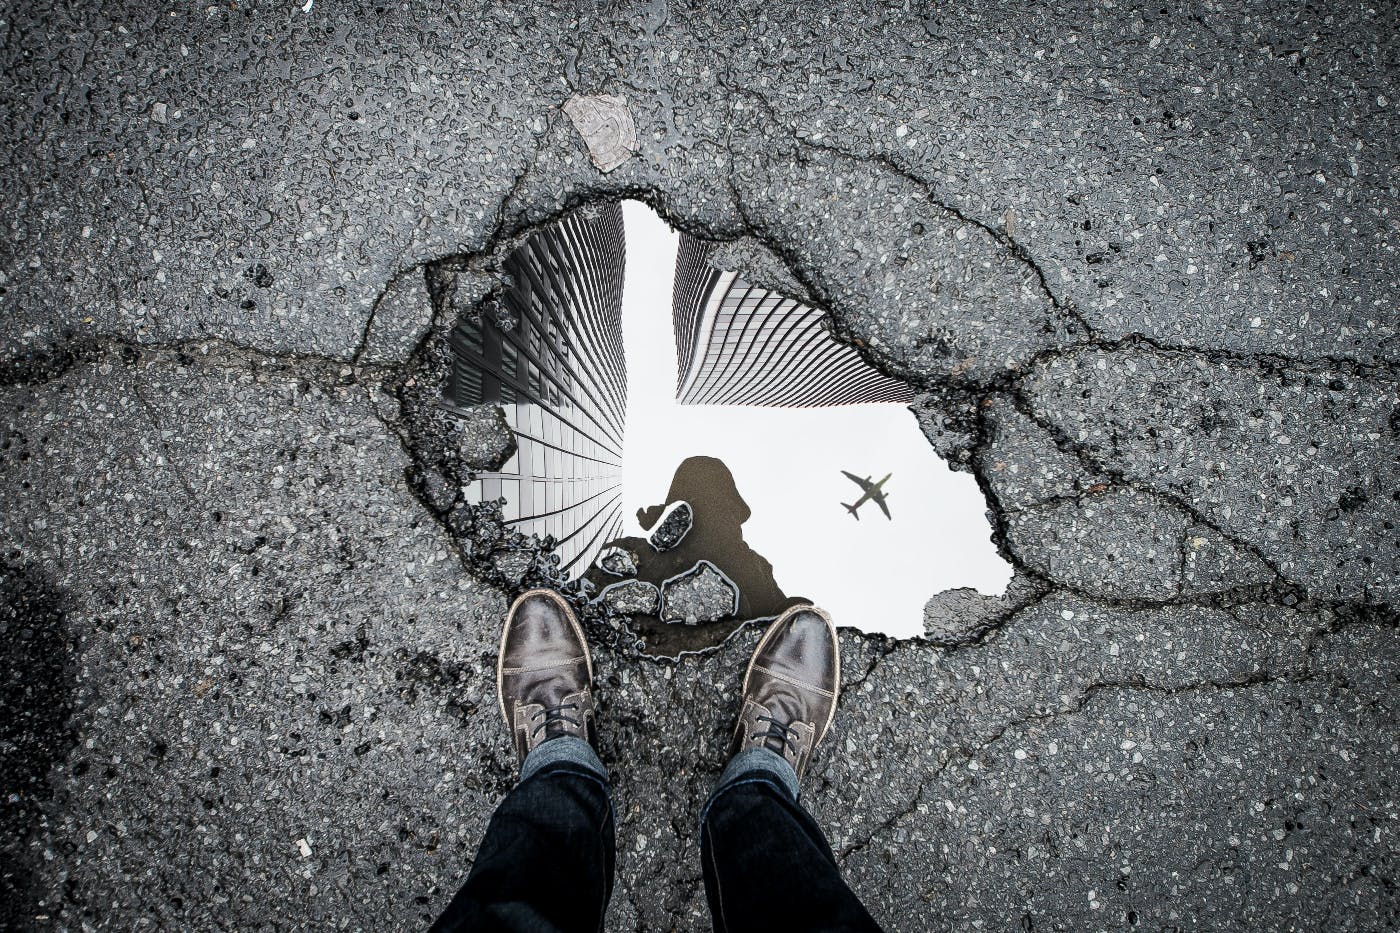 A pot hoel filled with water reflecting a person, buildings and a plane